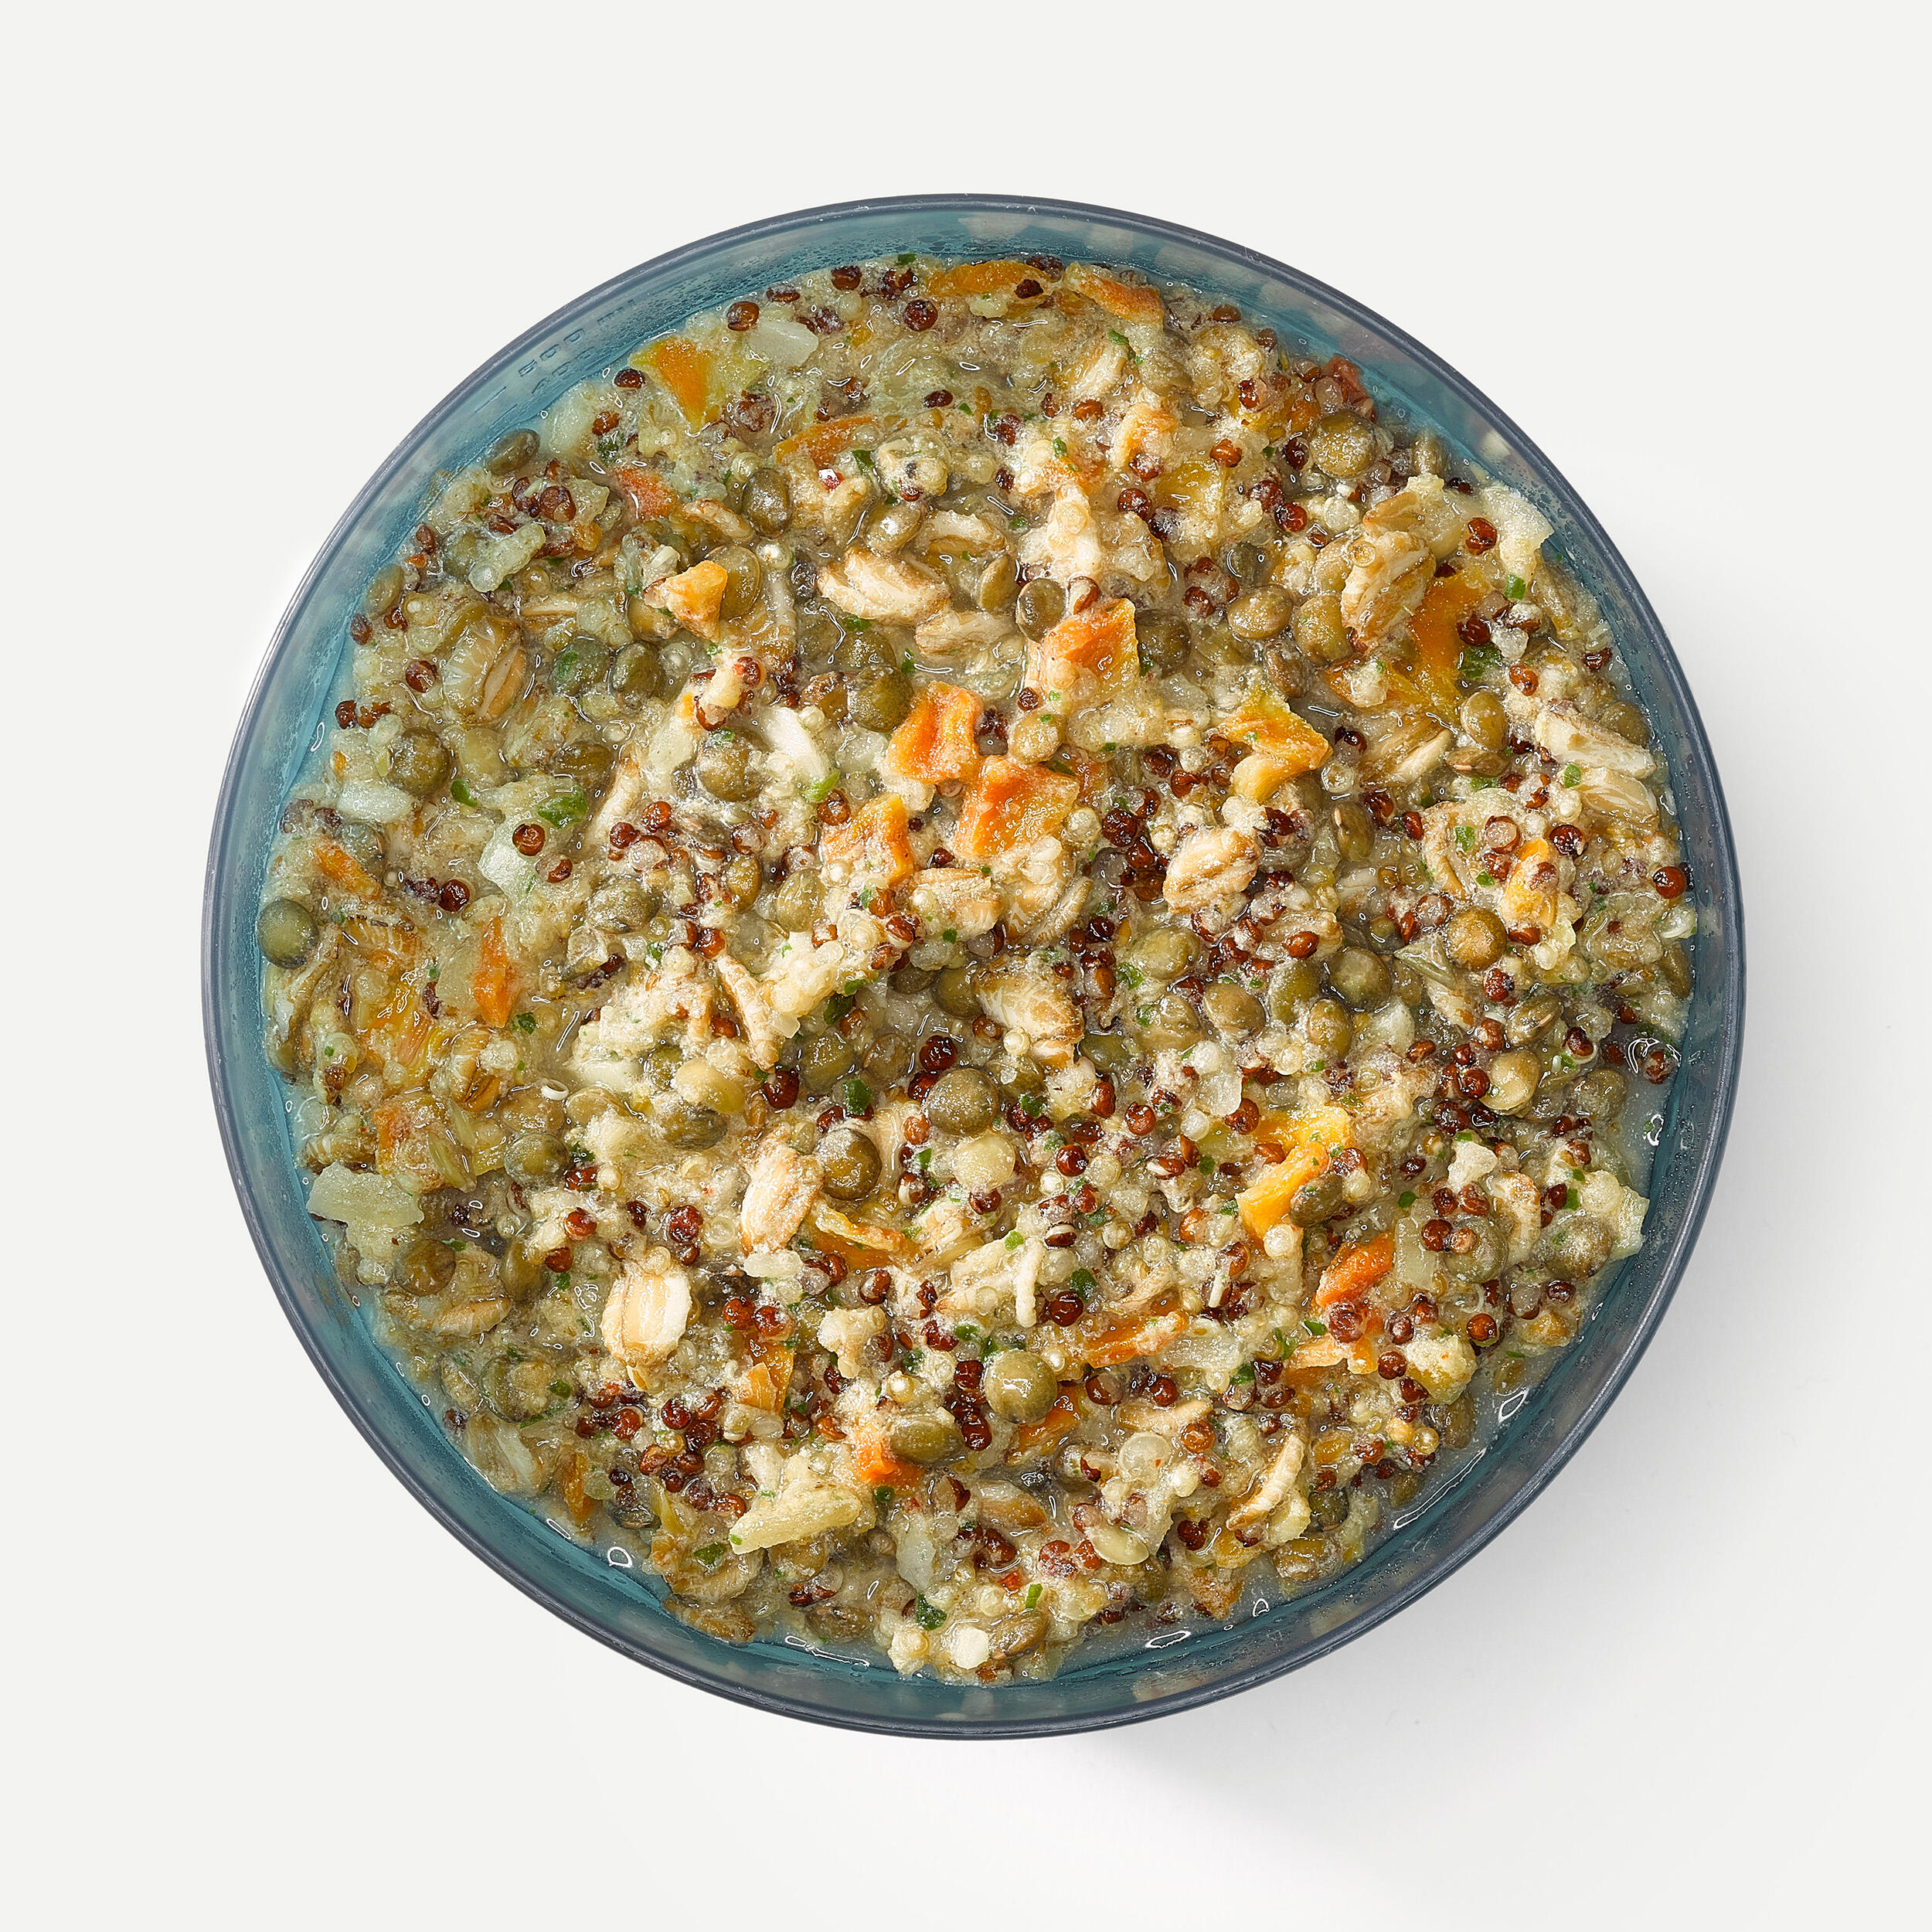 Vegetarian Dehydrated Meal - Vegetable Quinoa Duo - 120 g 3/3